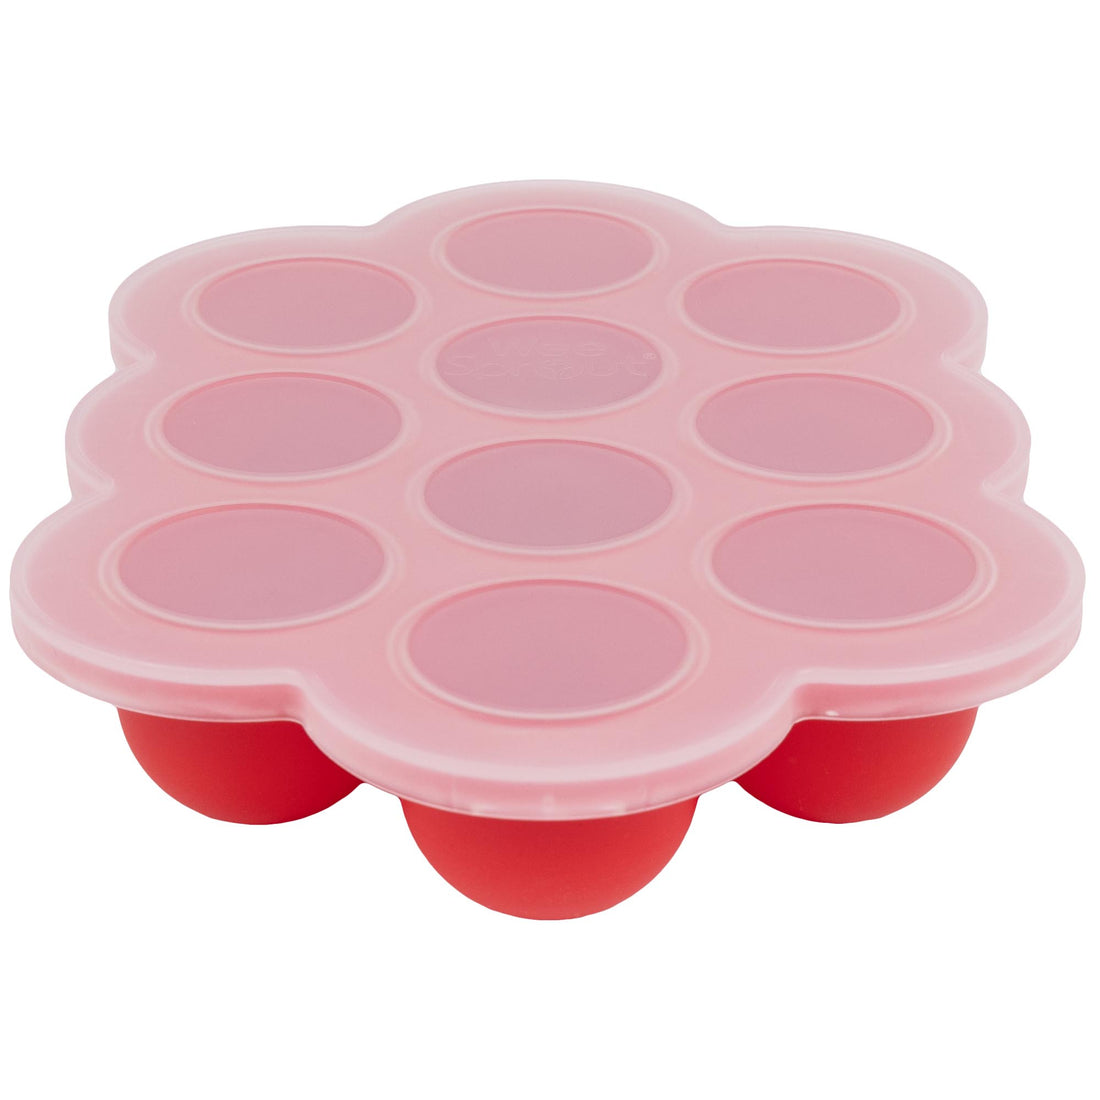 Wholesale BPA Free Microwave and Freezer Safe Silicone Food